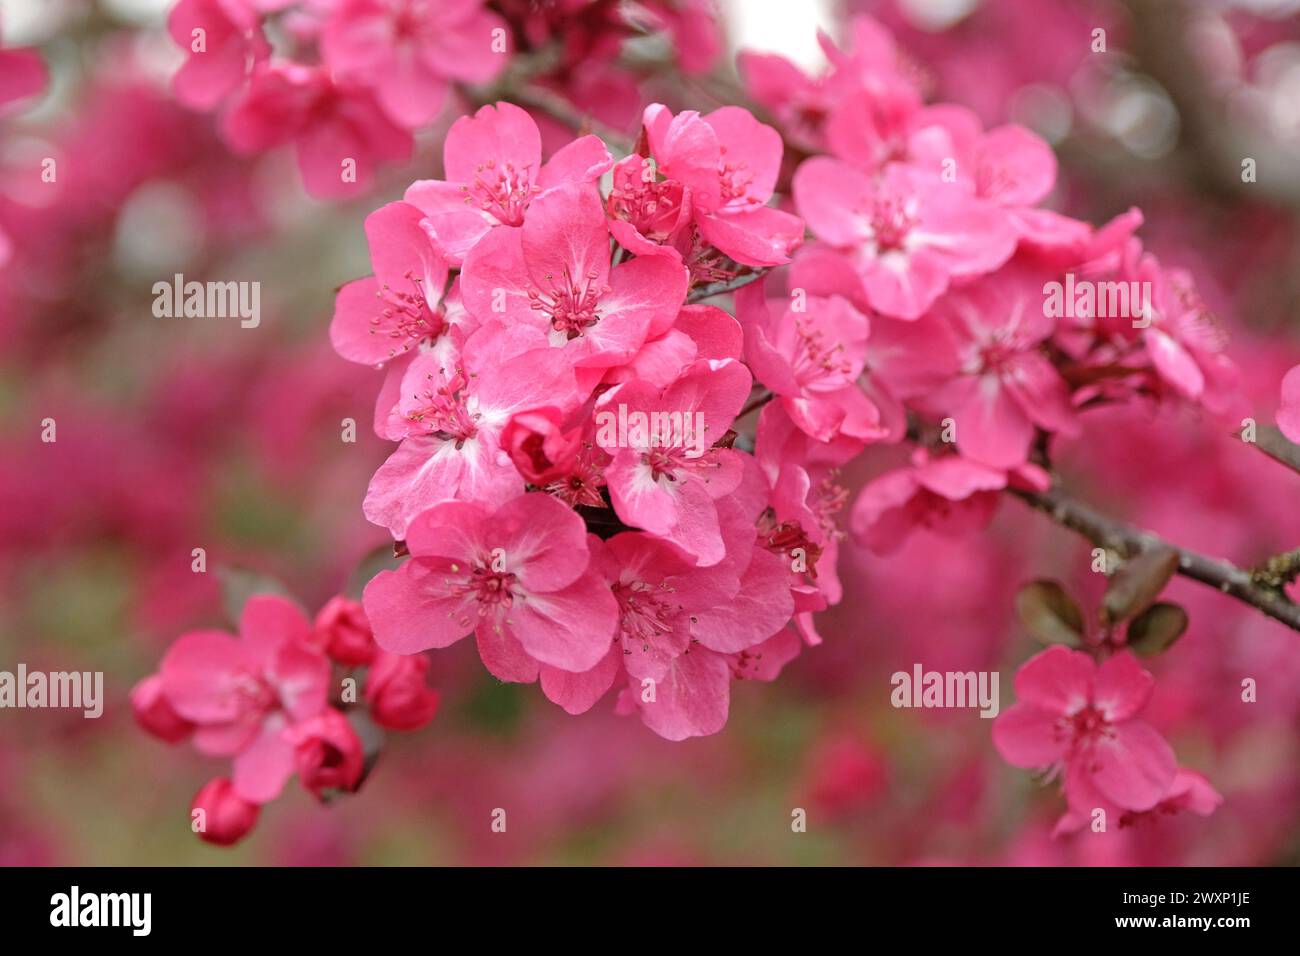 Malus Cardinal, or the pink crab apple tree, in flower. Stock Photo